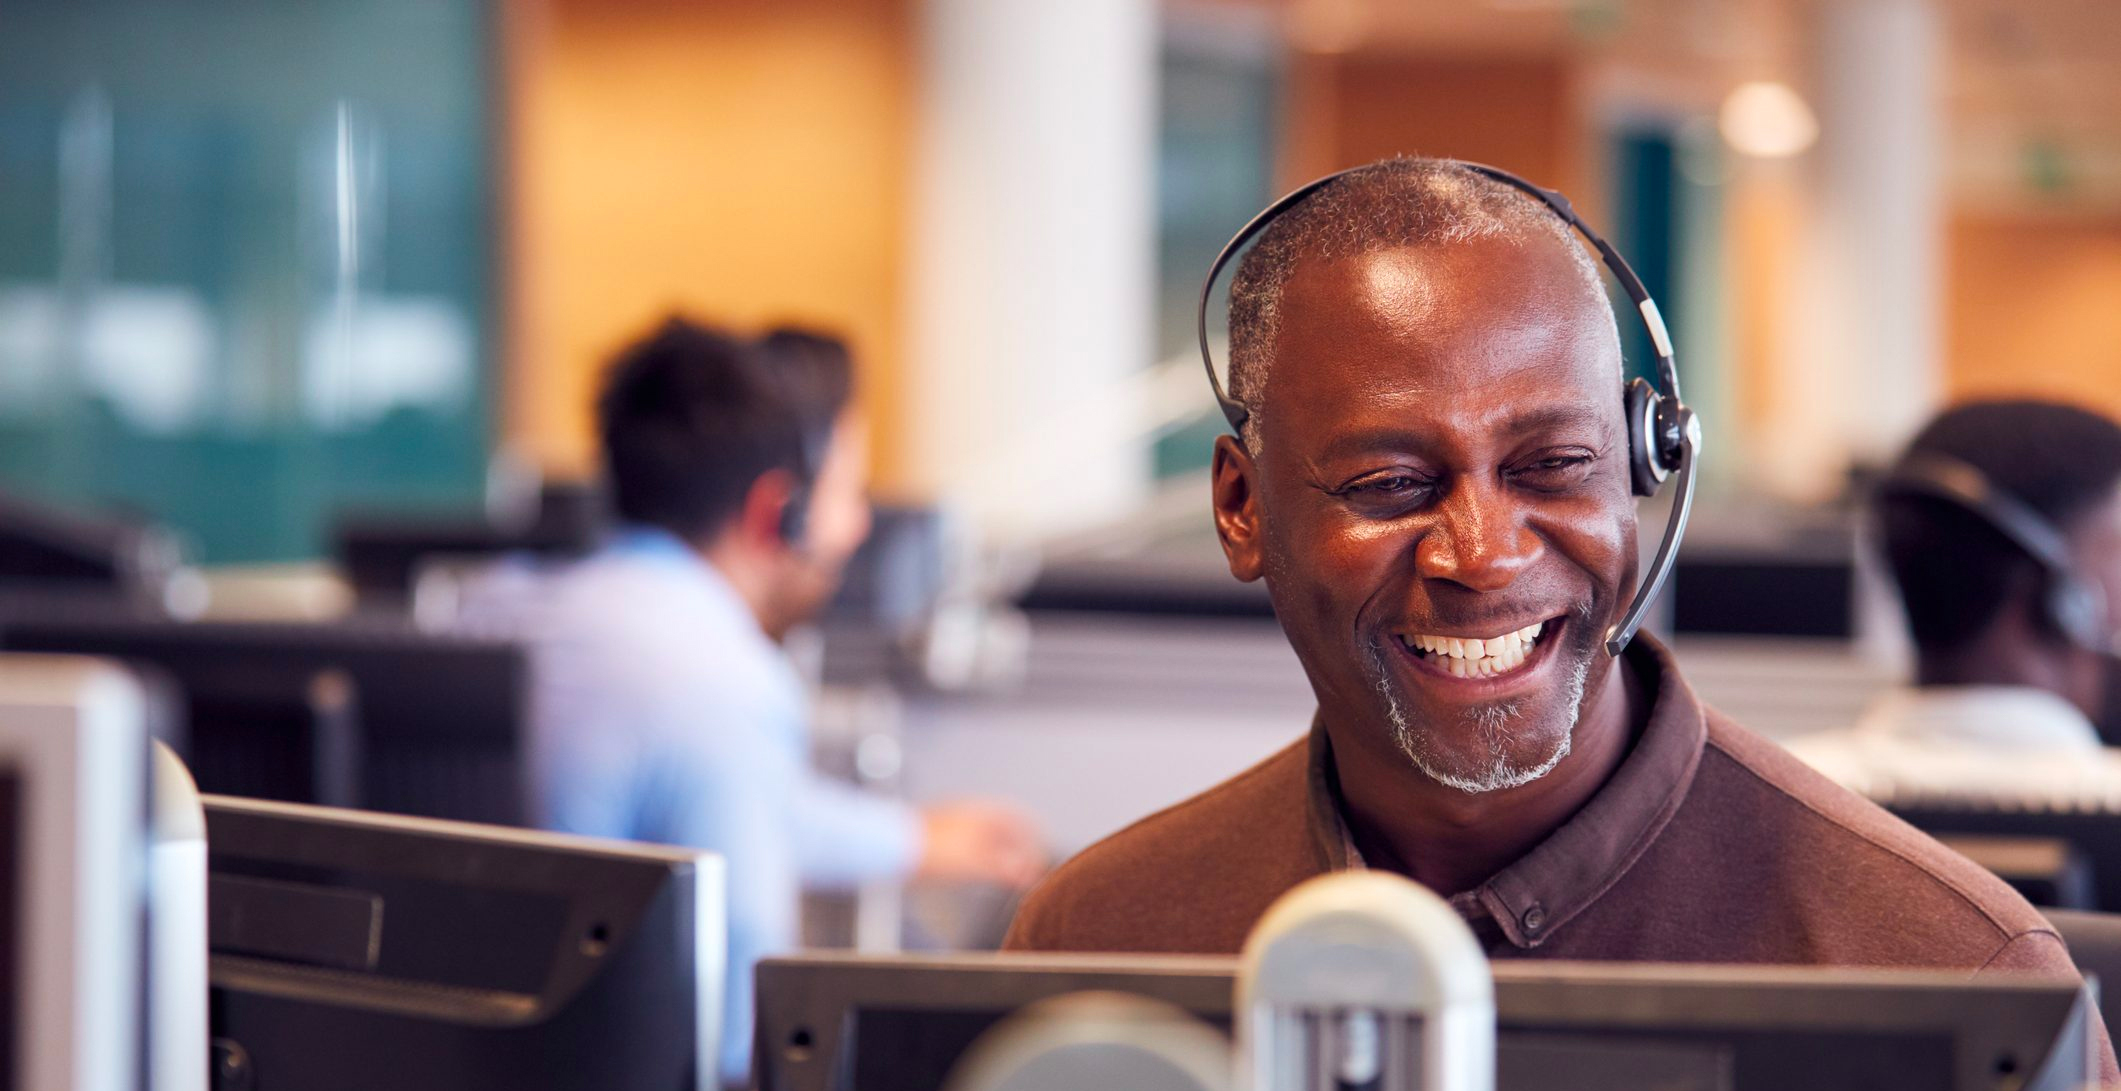 Mature Businessman Smiling Wearing Telephone Headset Talking To Caller In Customer Services Department